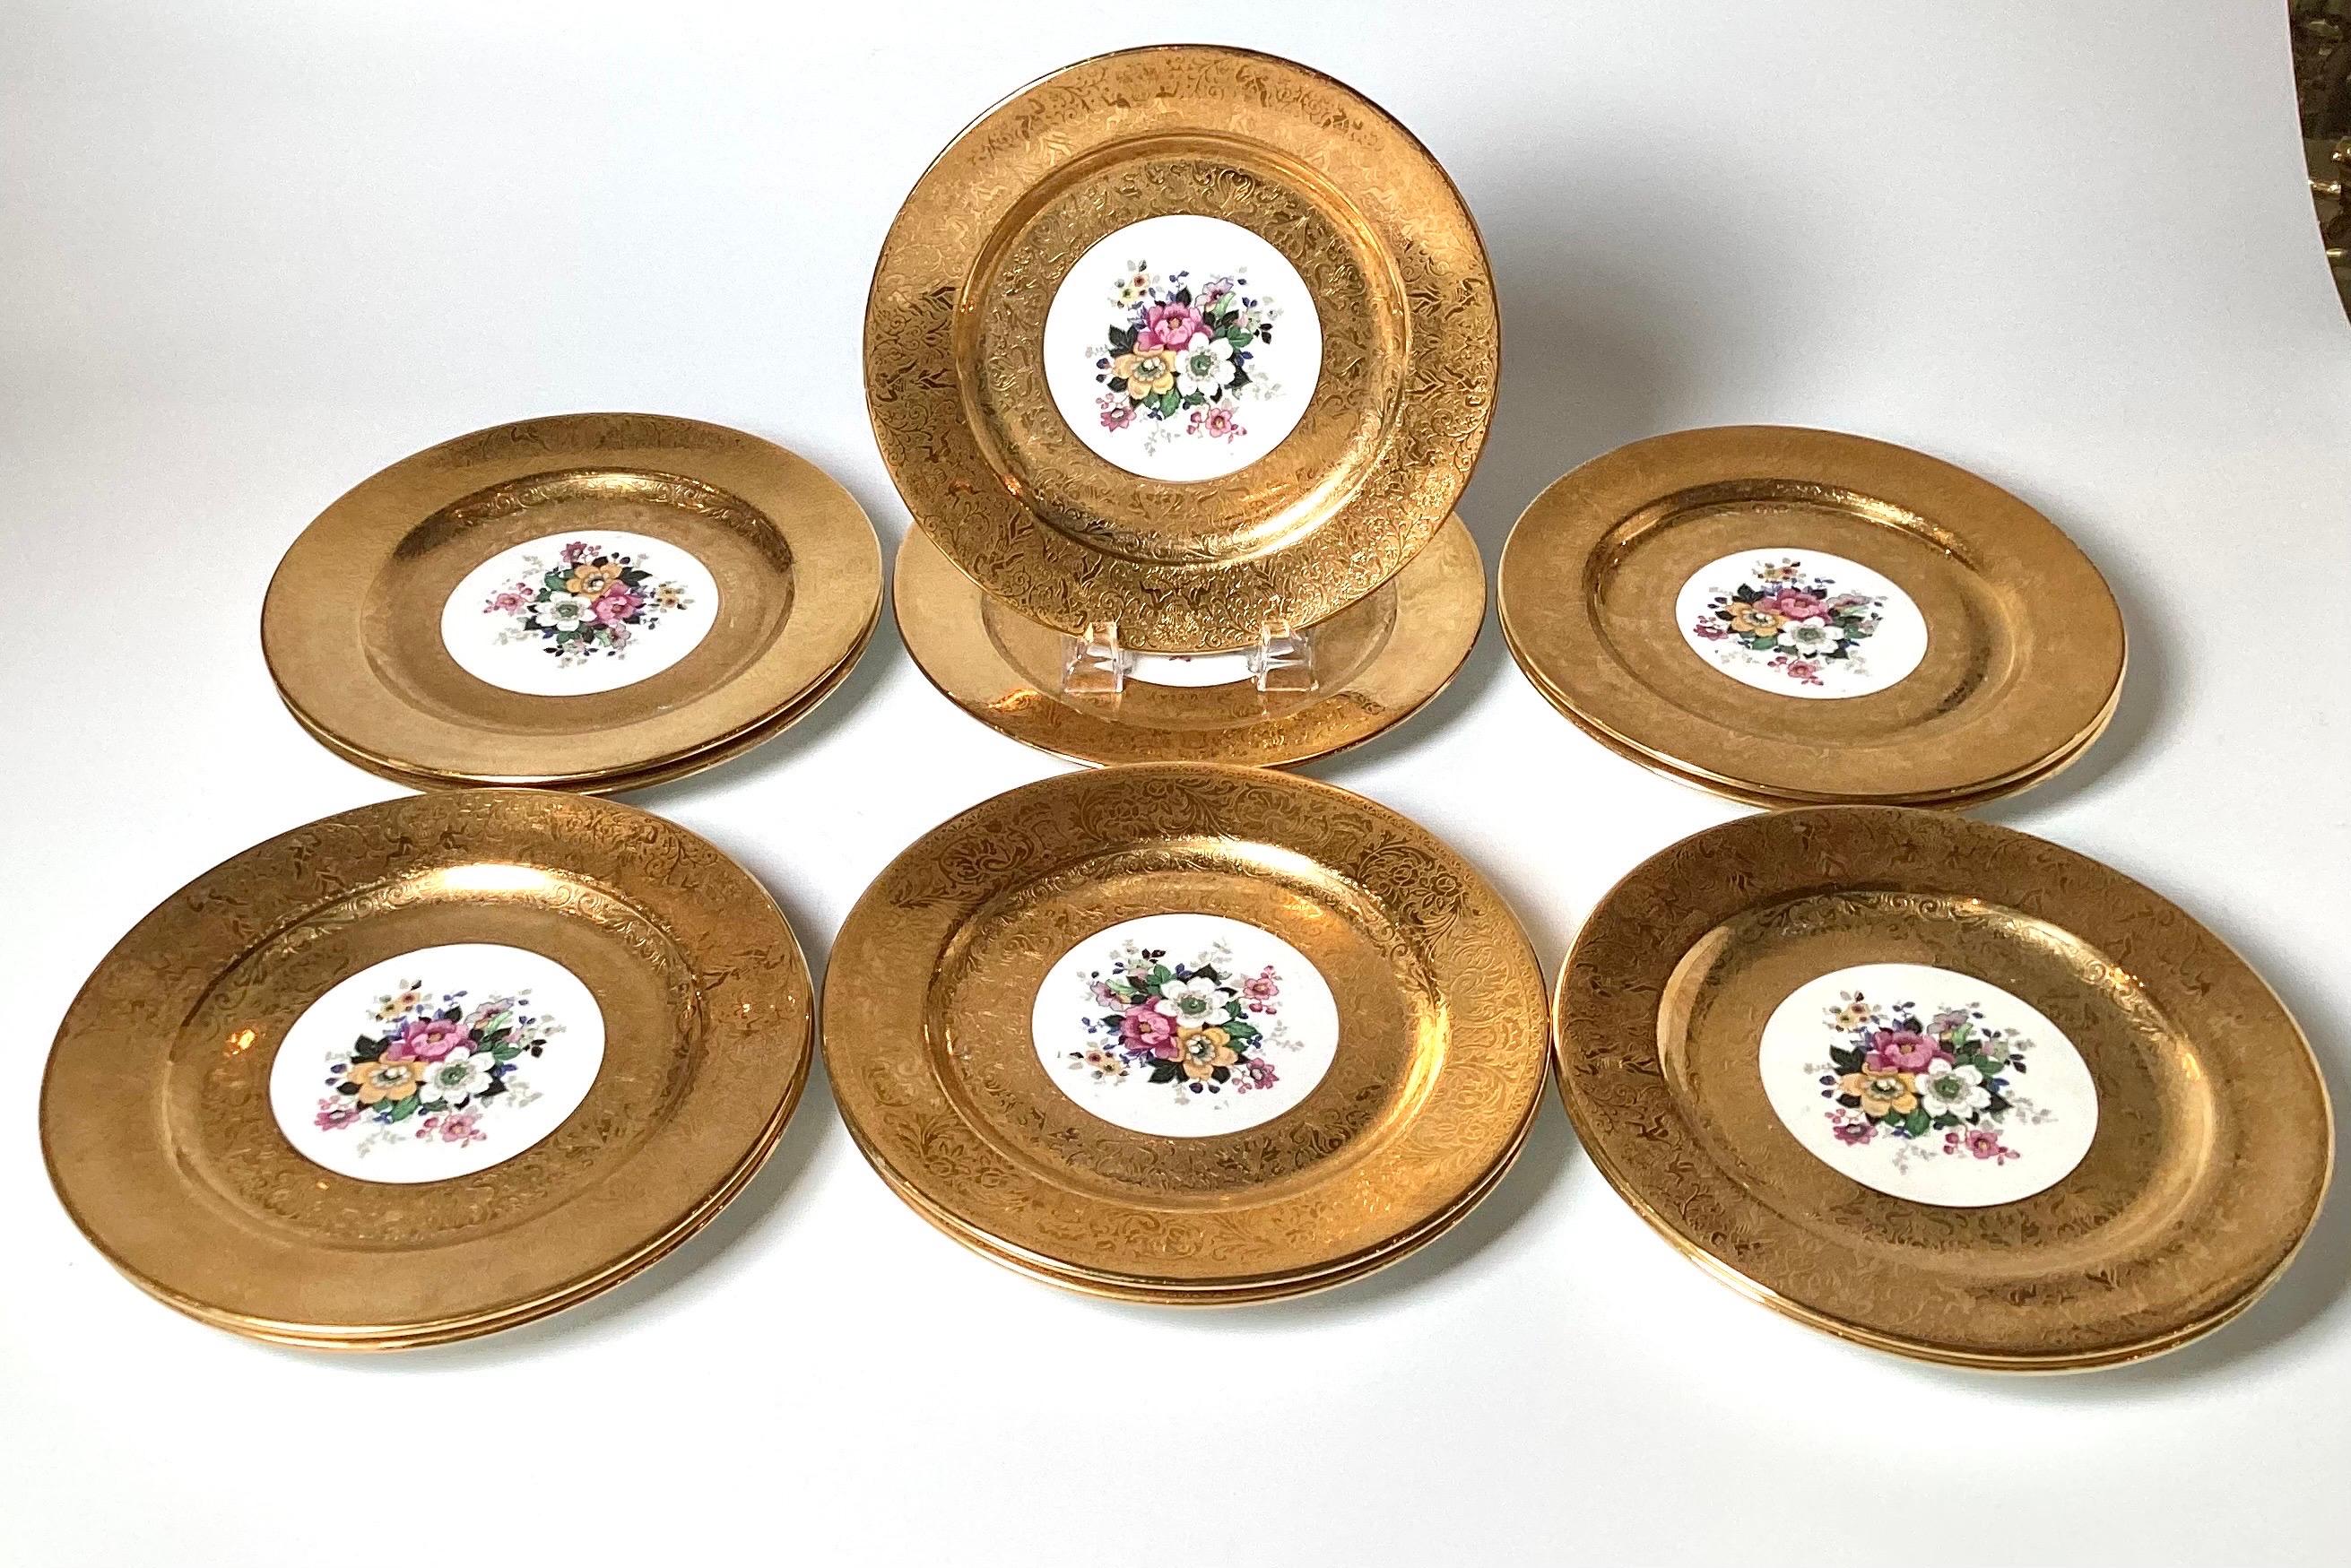 A set of 12 elaborated gold and floral service plates.  The plates with a broad 22 k gold border with a bouquet of Dresden floral centers.  The plates make for an elegant table or a stunning display in a cabinet.  10.25 inches in diameter